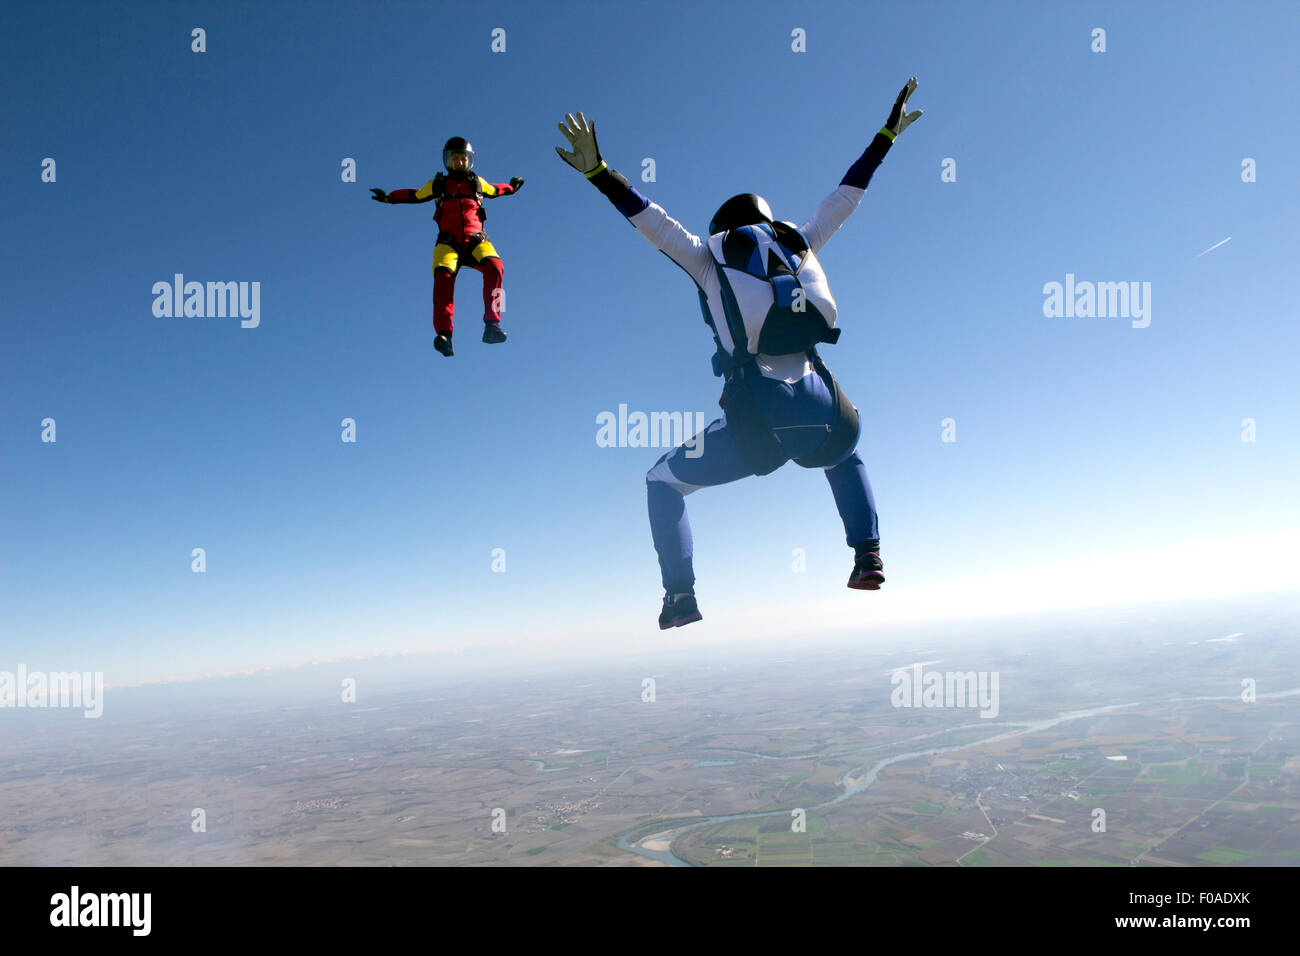 Freeflying skydivers in blue sky Stock Photo